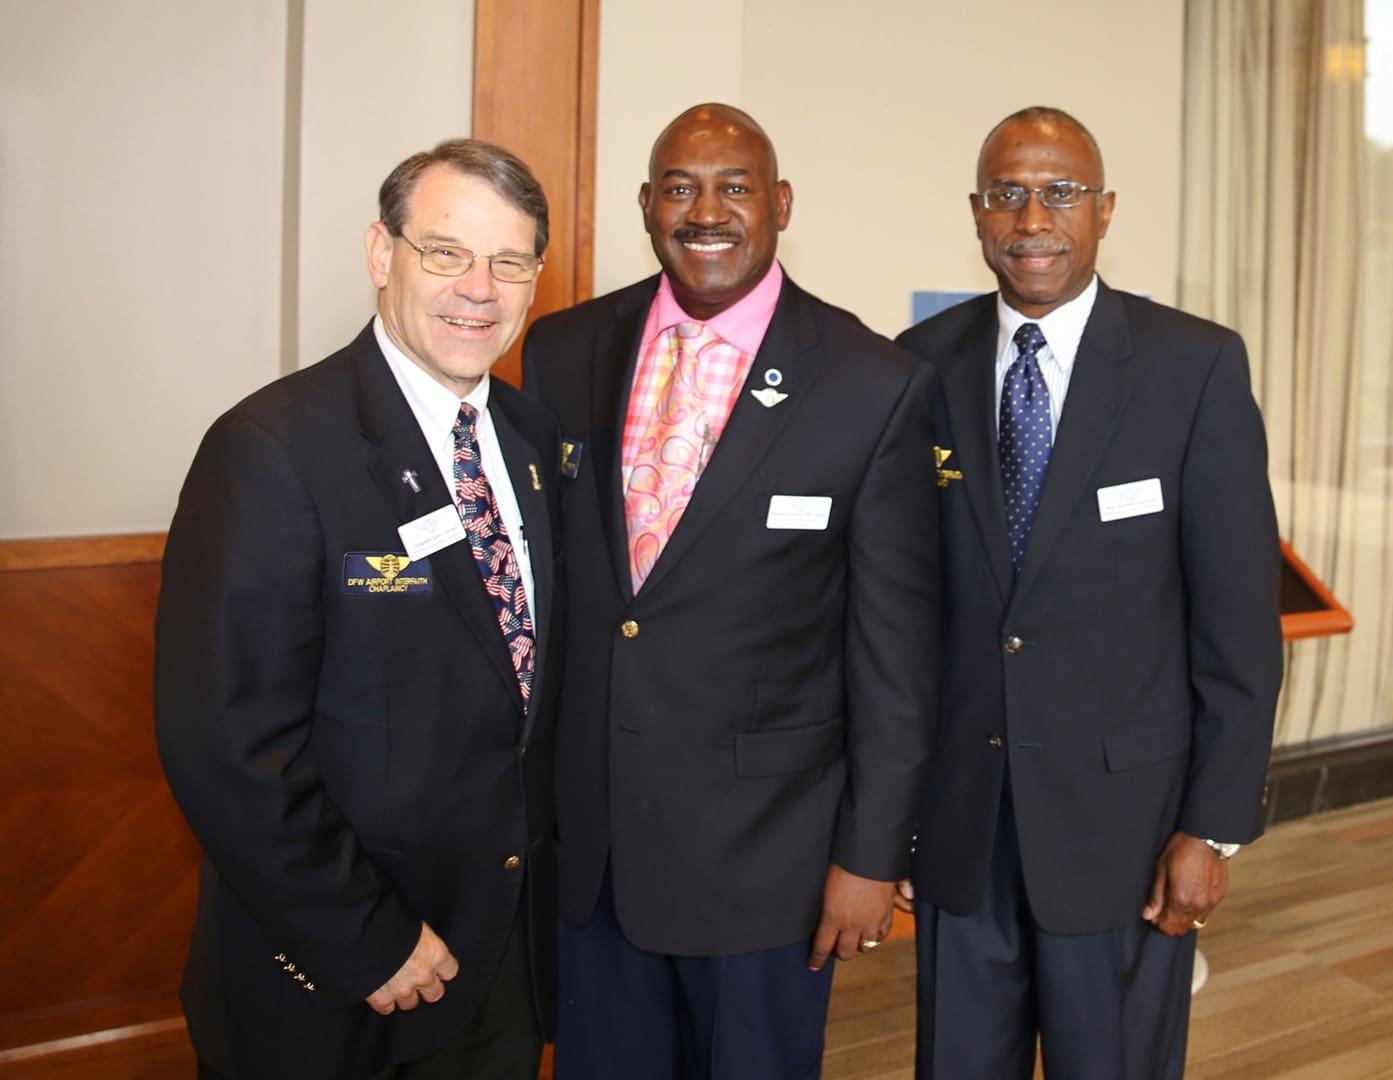 Three men in suits posing for a photo.